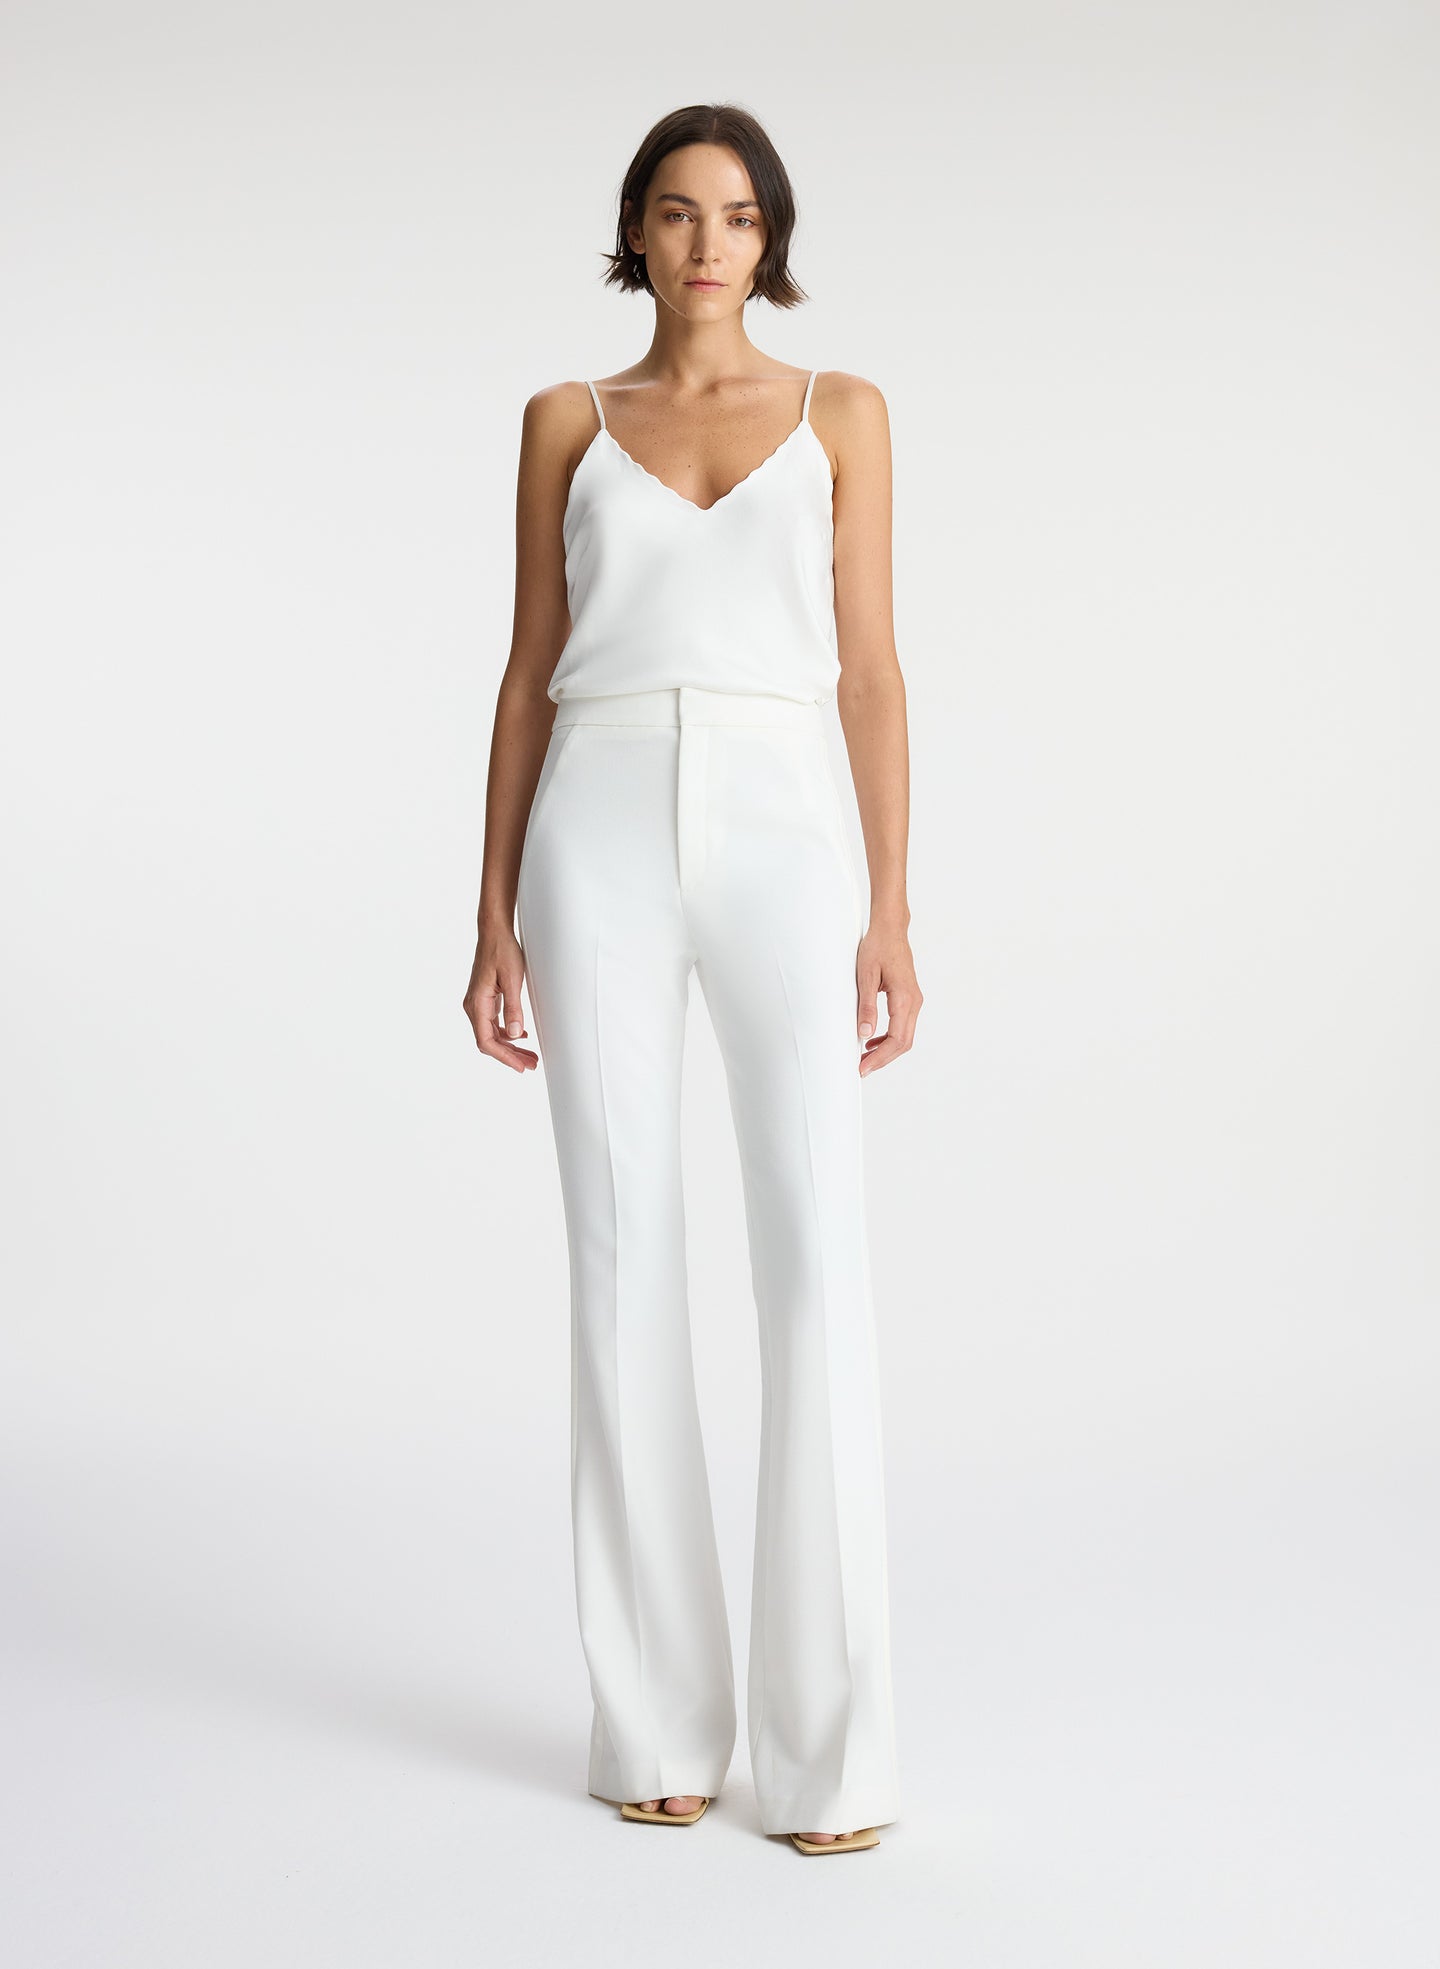 front view of woman wearing white satin camisole and white flared tuxedo pants